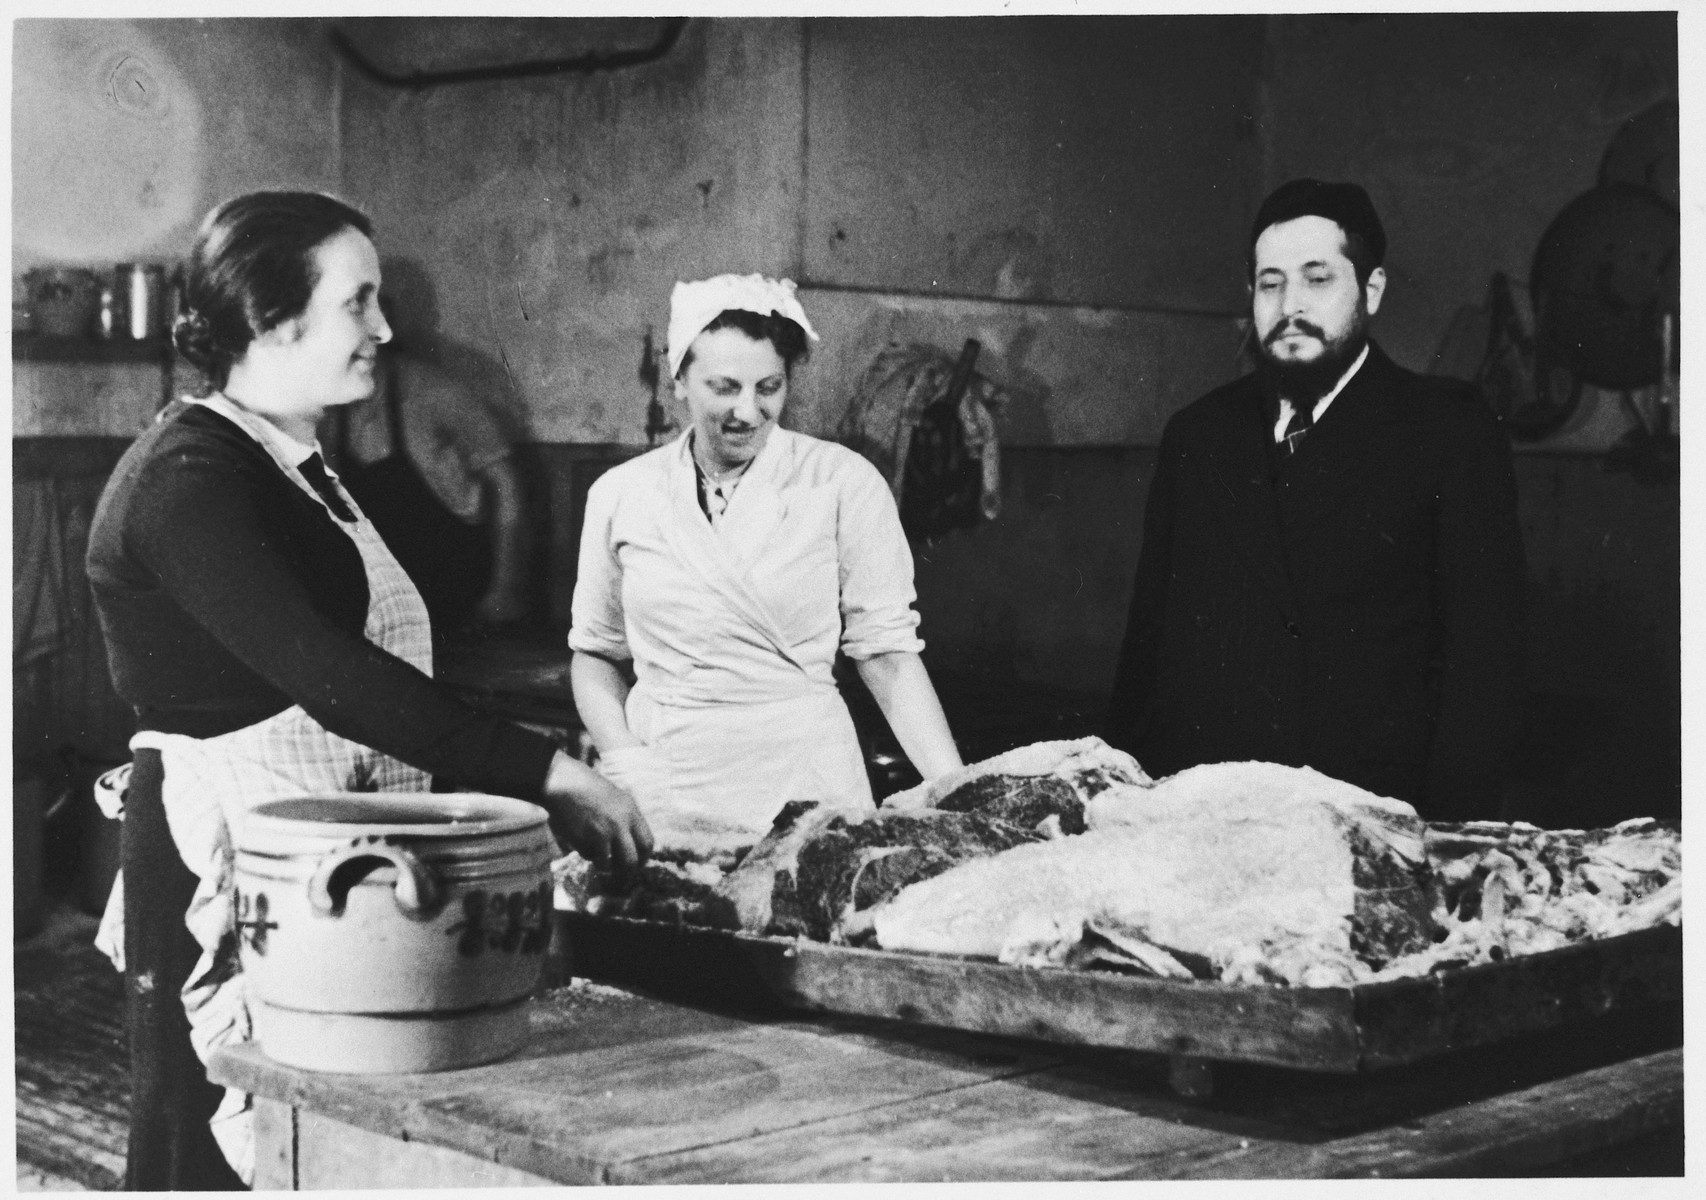 Cooks prepare a meal for Jewish refugees from the Third Reich at a refugee center sponsored by the ESRA Jewish social welfare organization.